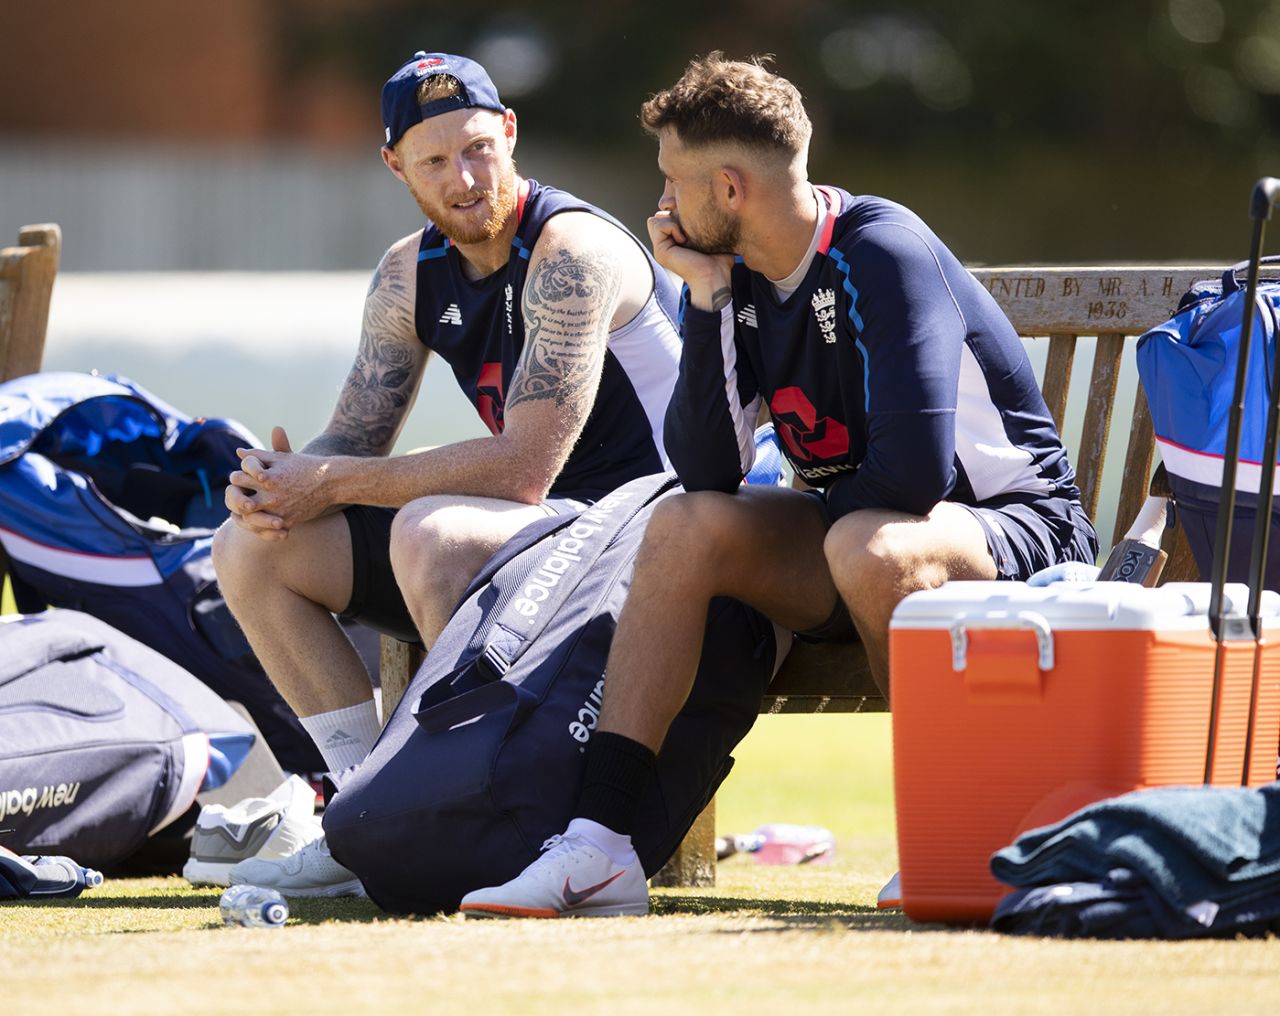 Ben Stokes and Alex Hales during an England training session, July 26, 2018